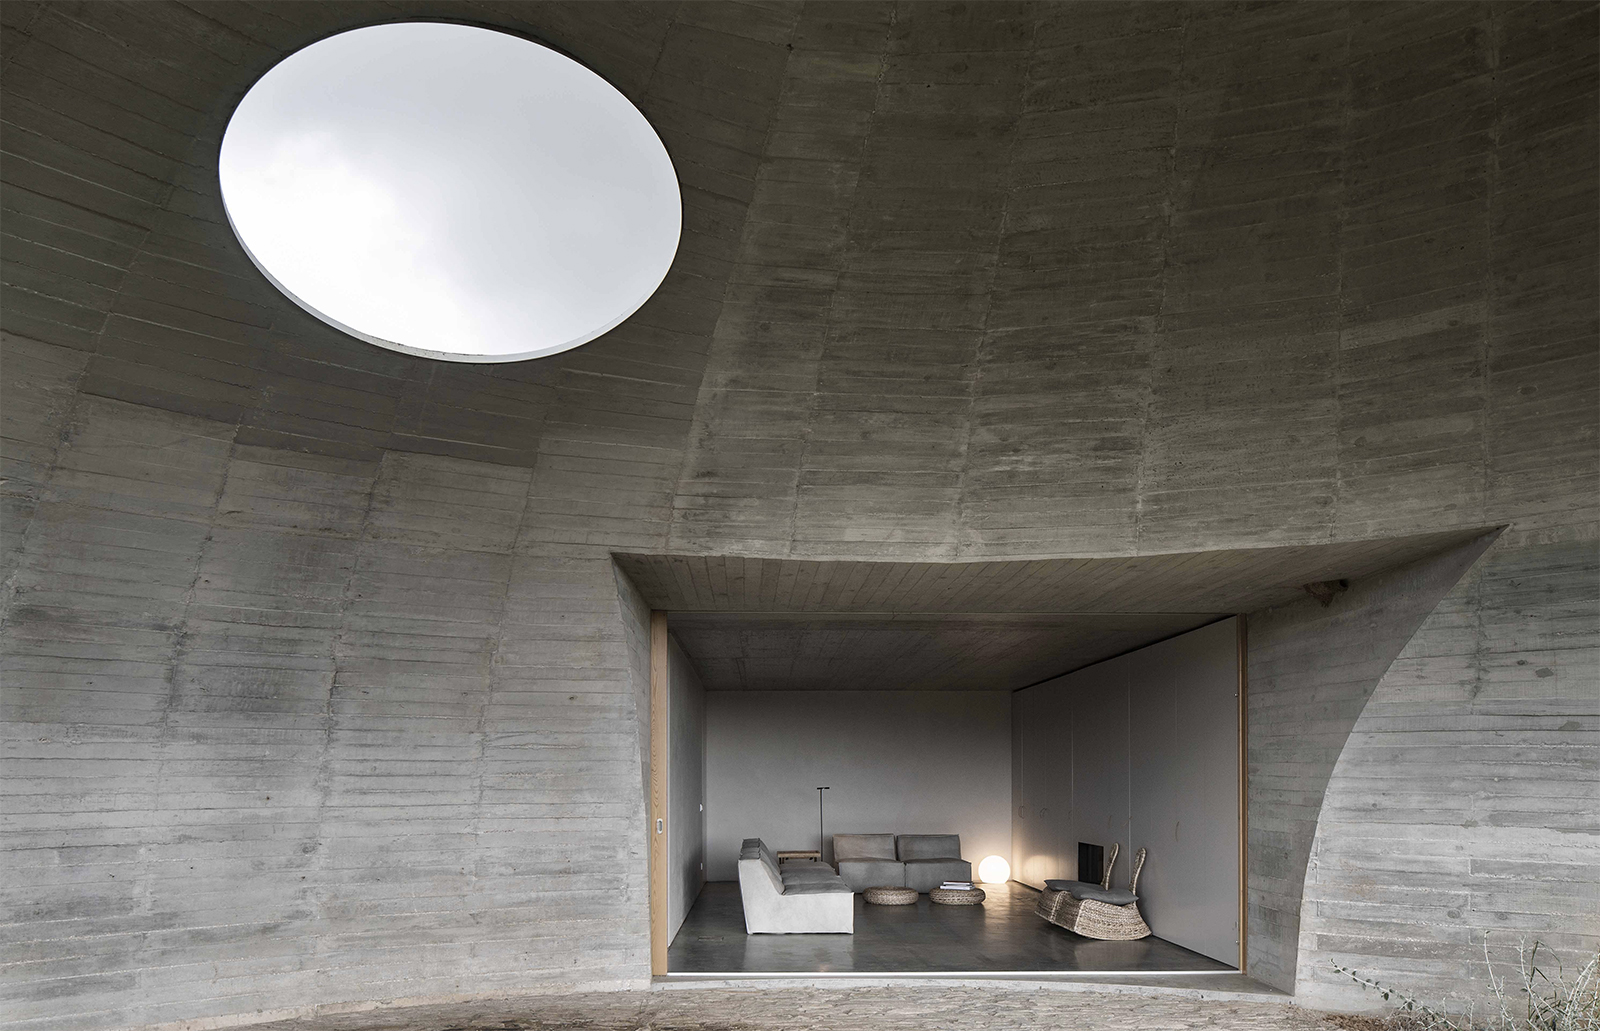 Casa na Terra or ‘House in the Earth’ is a concrete volume with geometric voids carved out of it to create monastic communal spaces and three ensuite bedrooms.